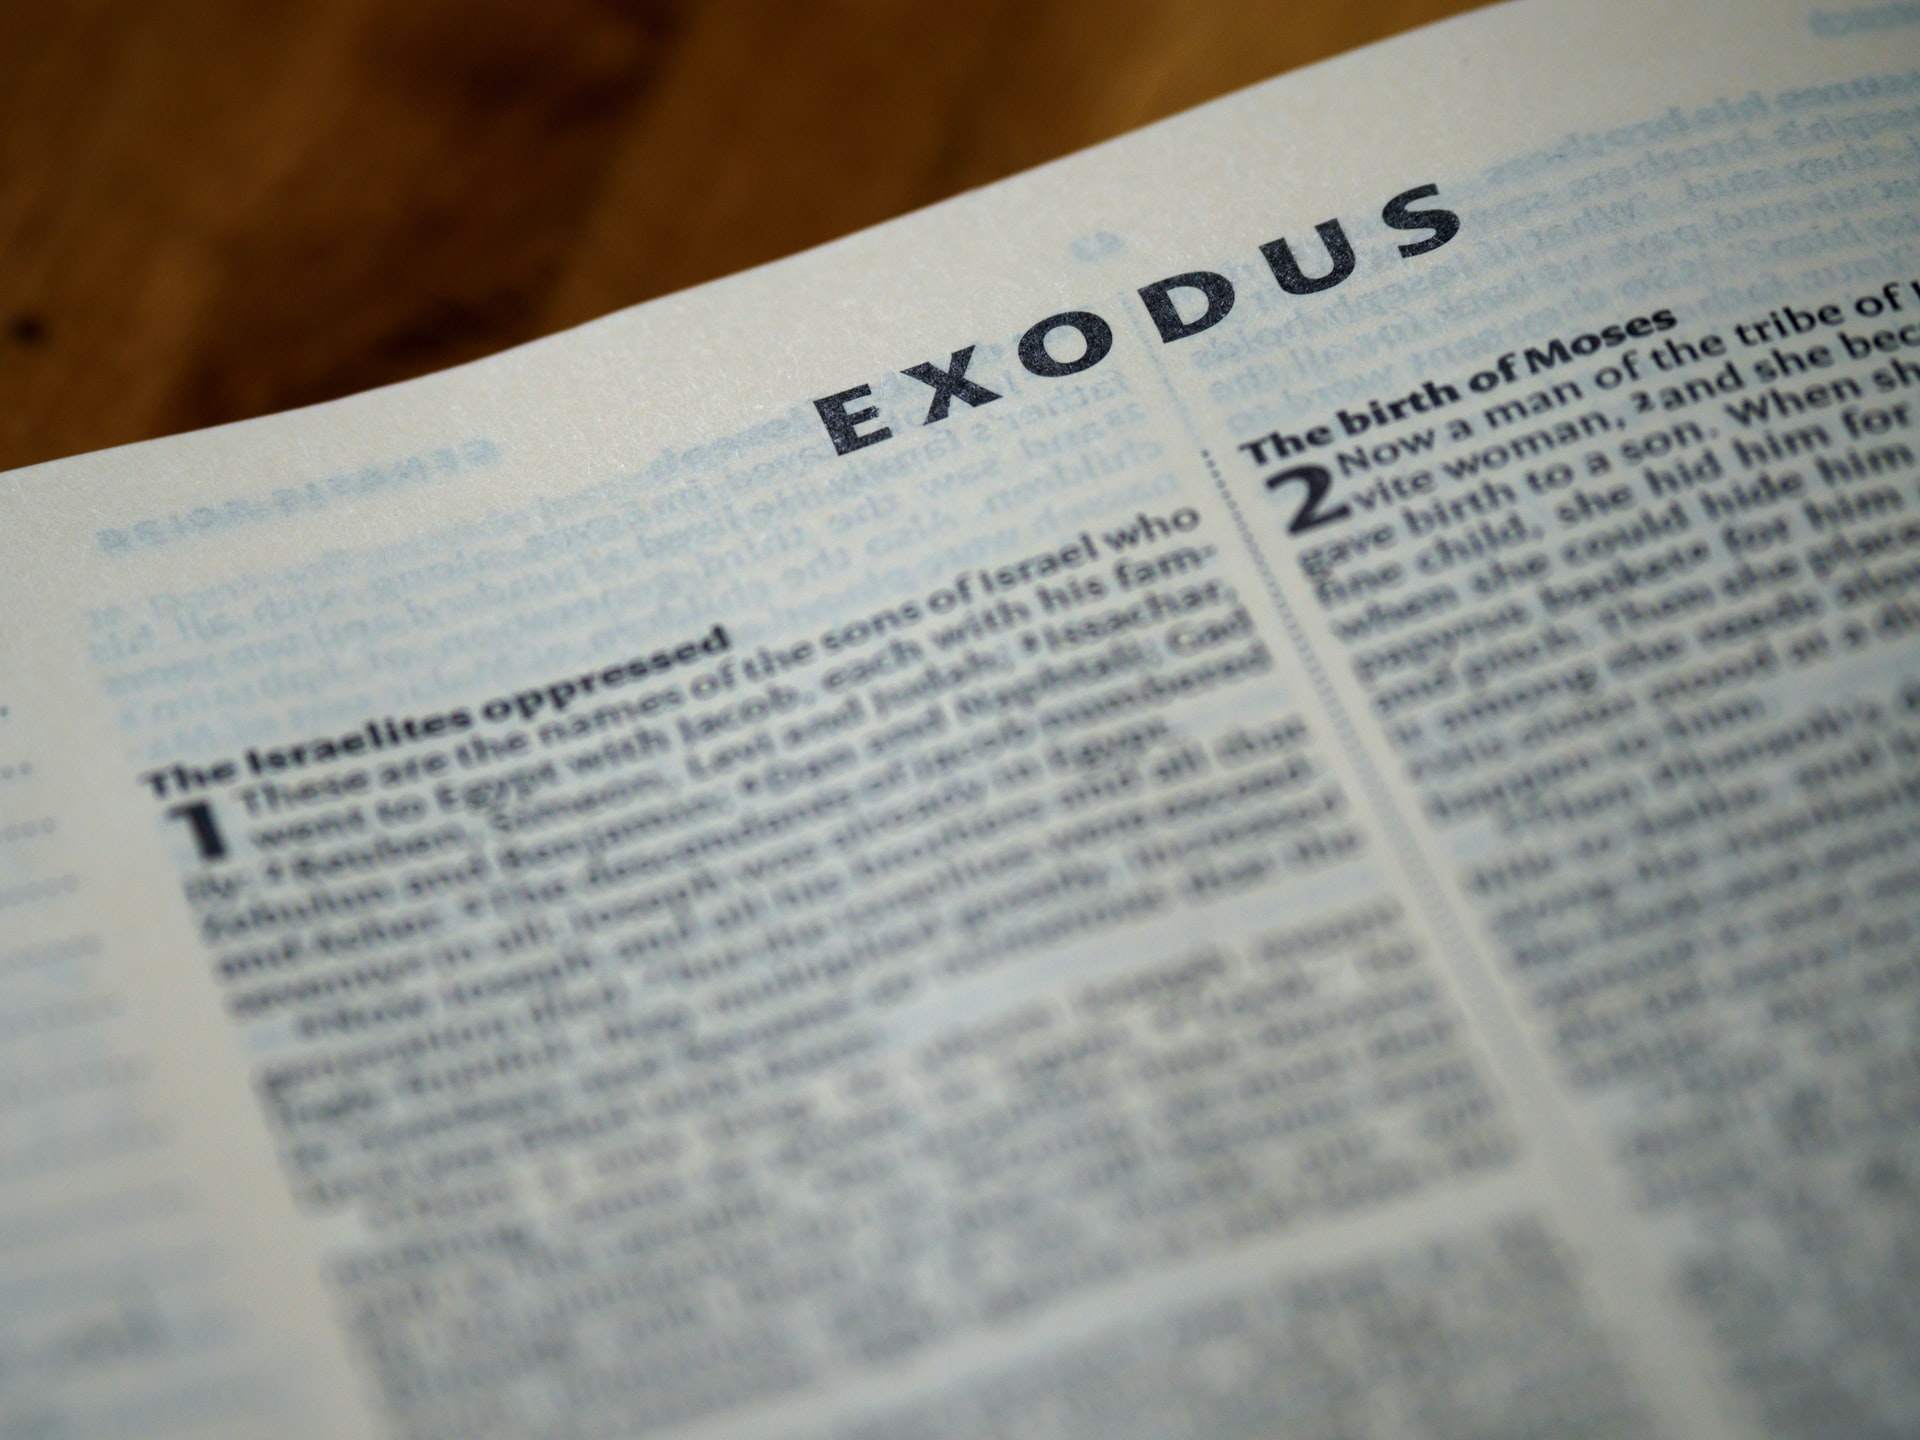 The Book of Exodus, the second book of the Bible